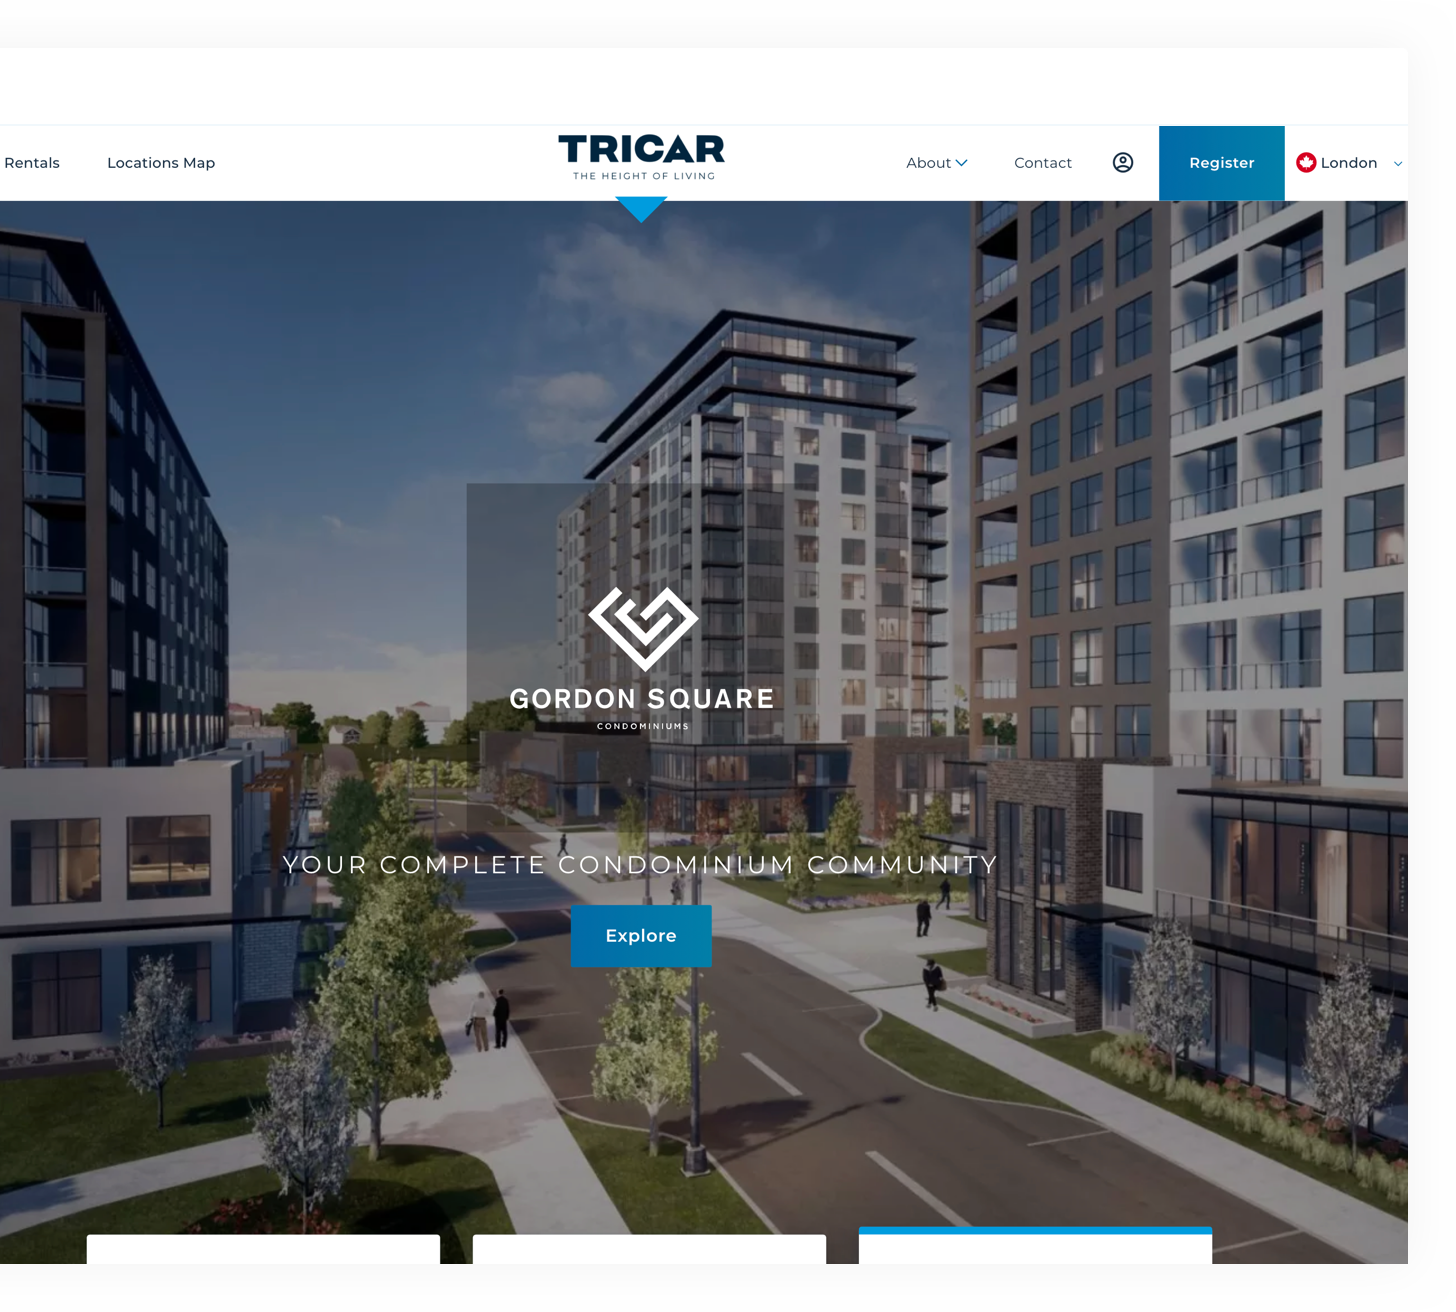 Tricar home page loaded on a desktop web browser, showing apartment buildings on a street view